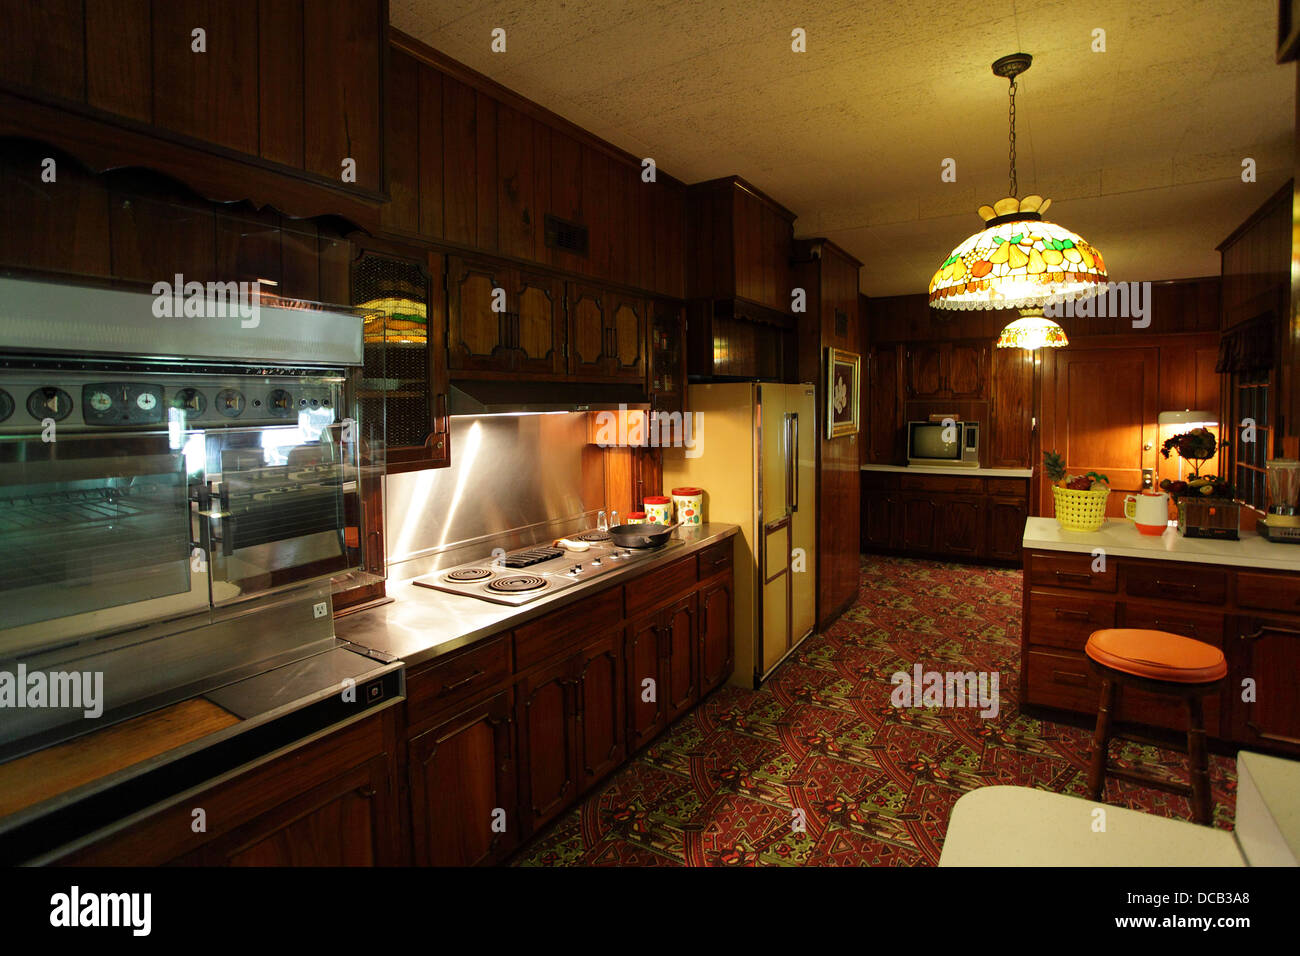 The Kitchen at Graceland the home of Elvis Presley in Memphis Tennessee USA Stock Photo